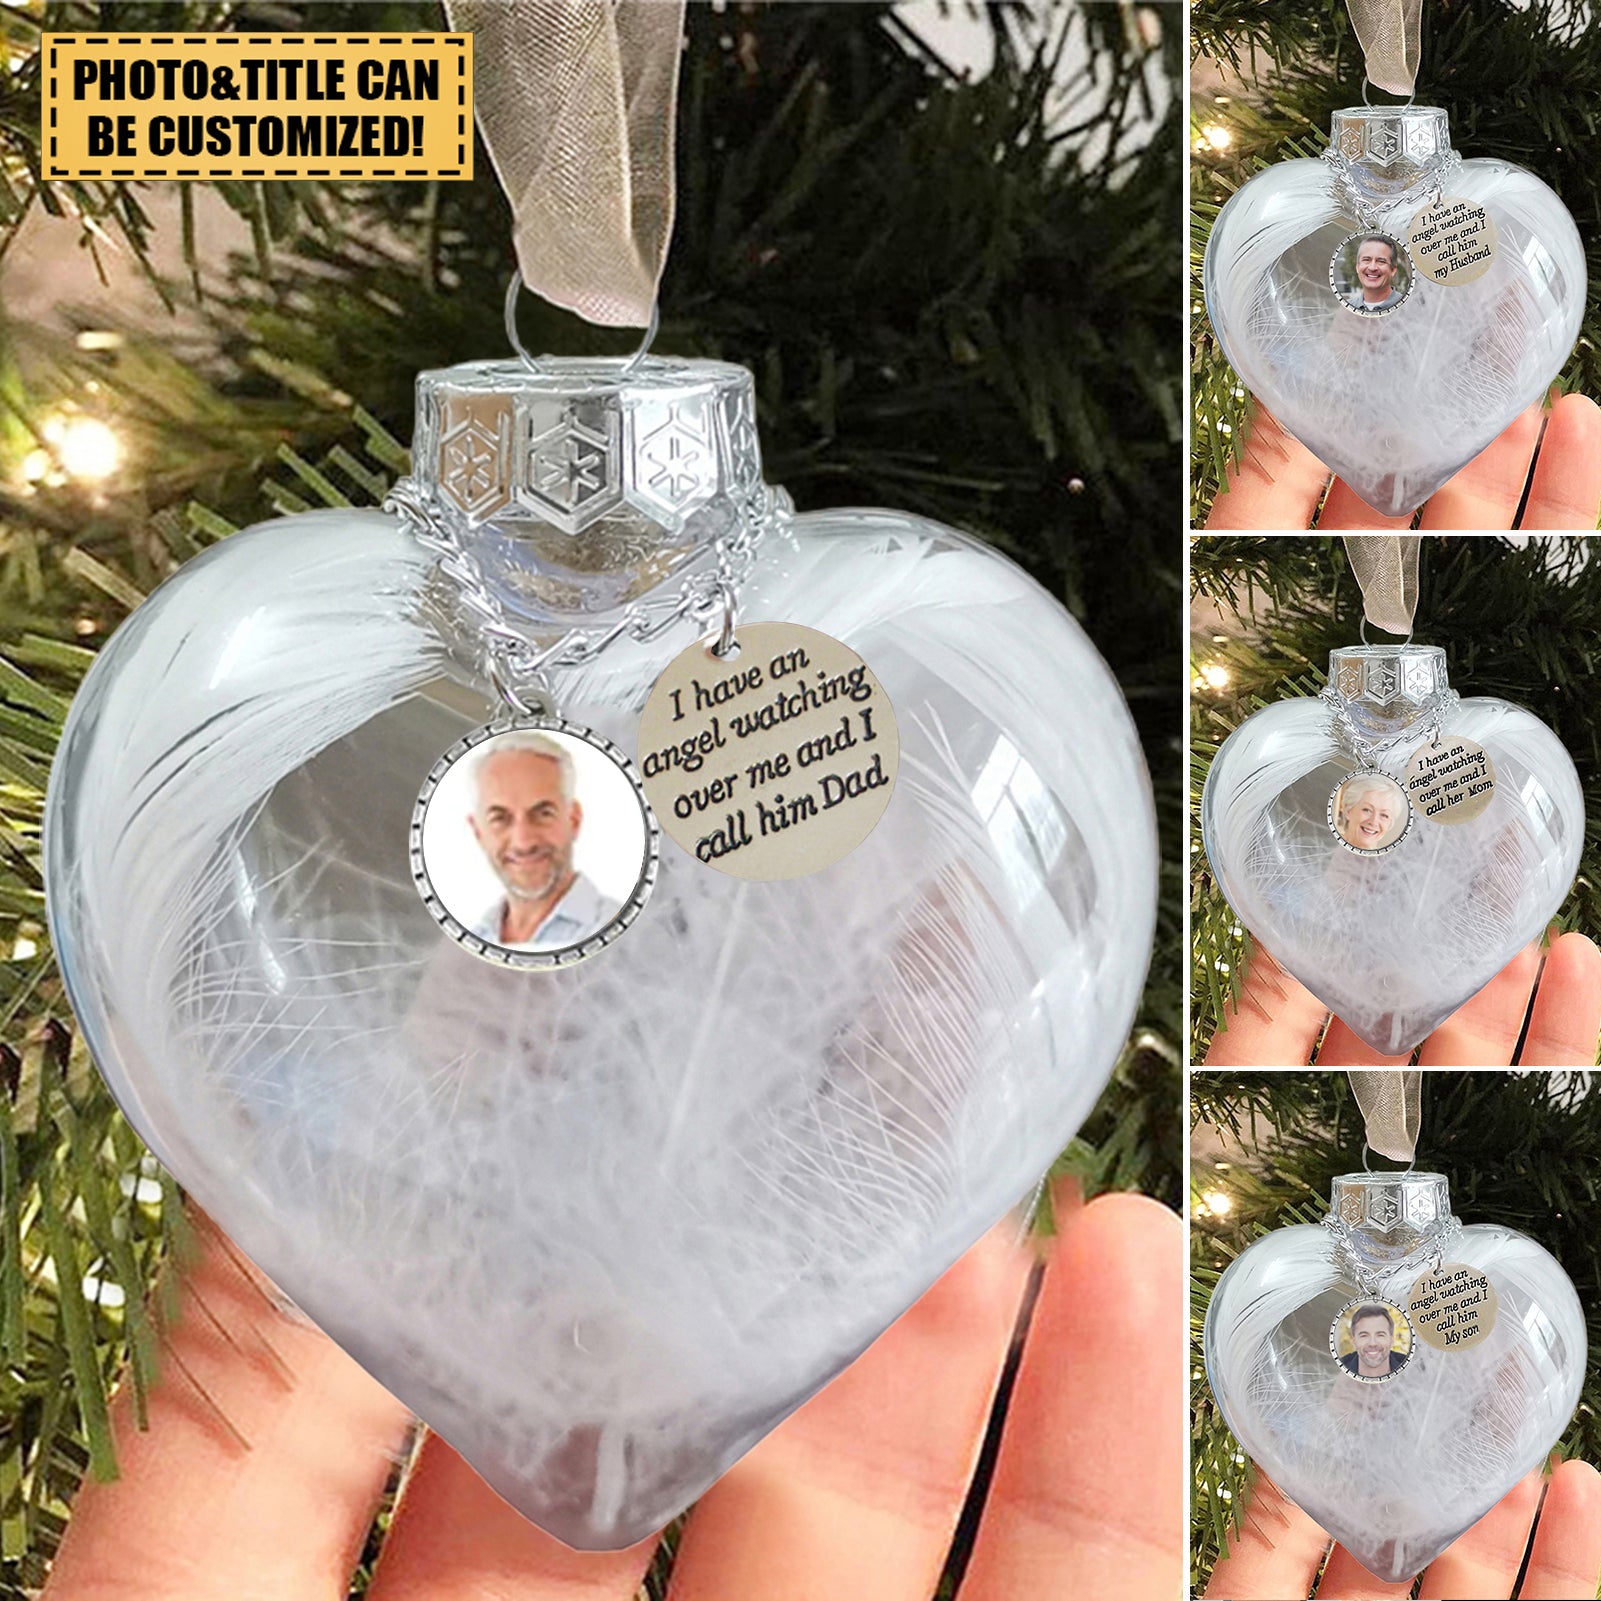 I Have An Angel Watching Over Me-Memorial Personalized Ornament